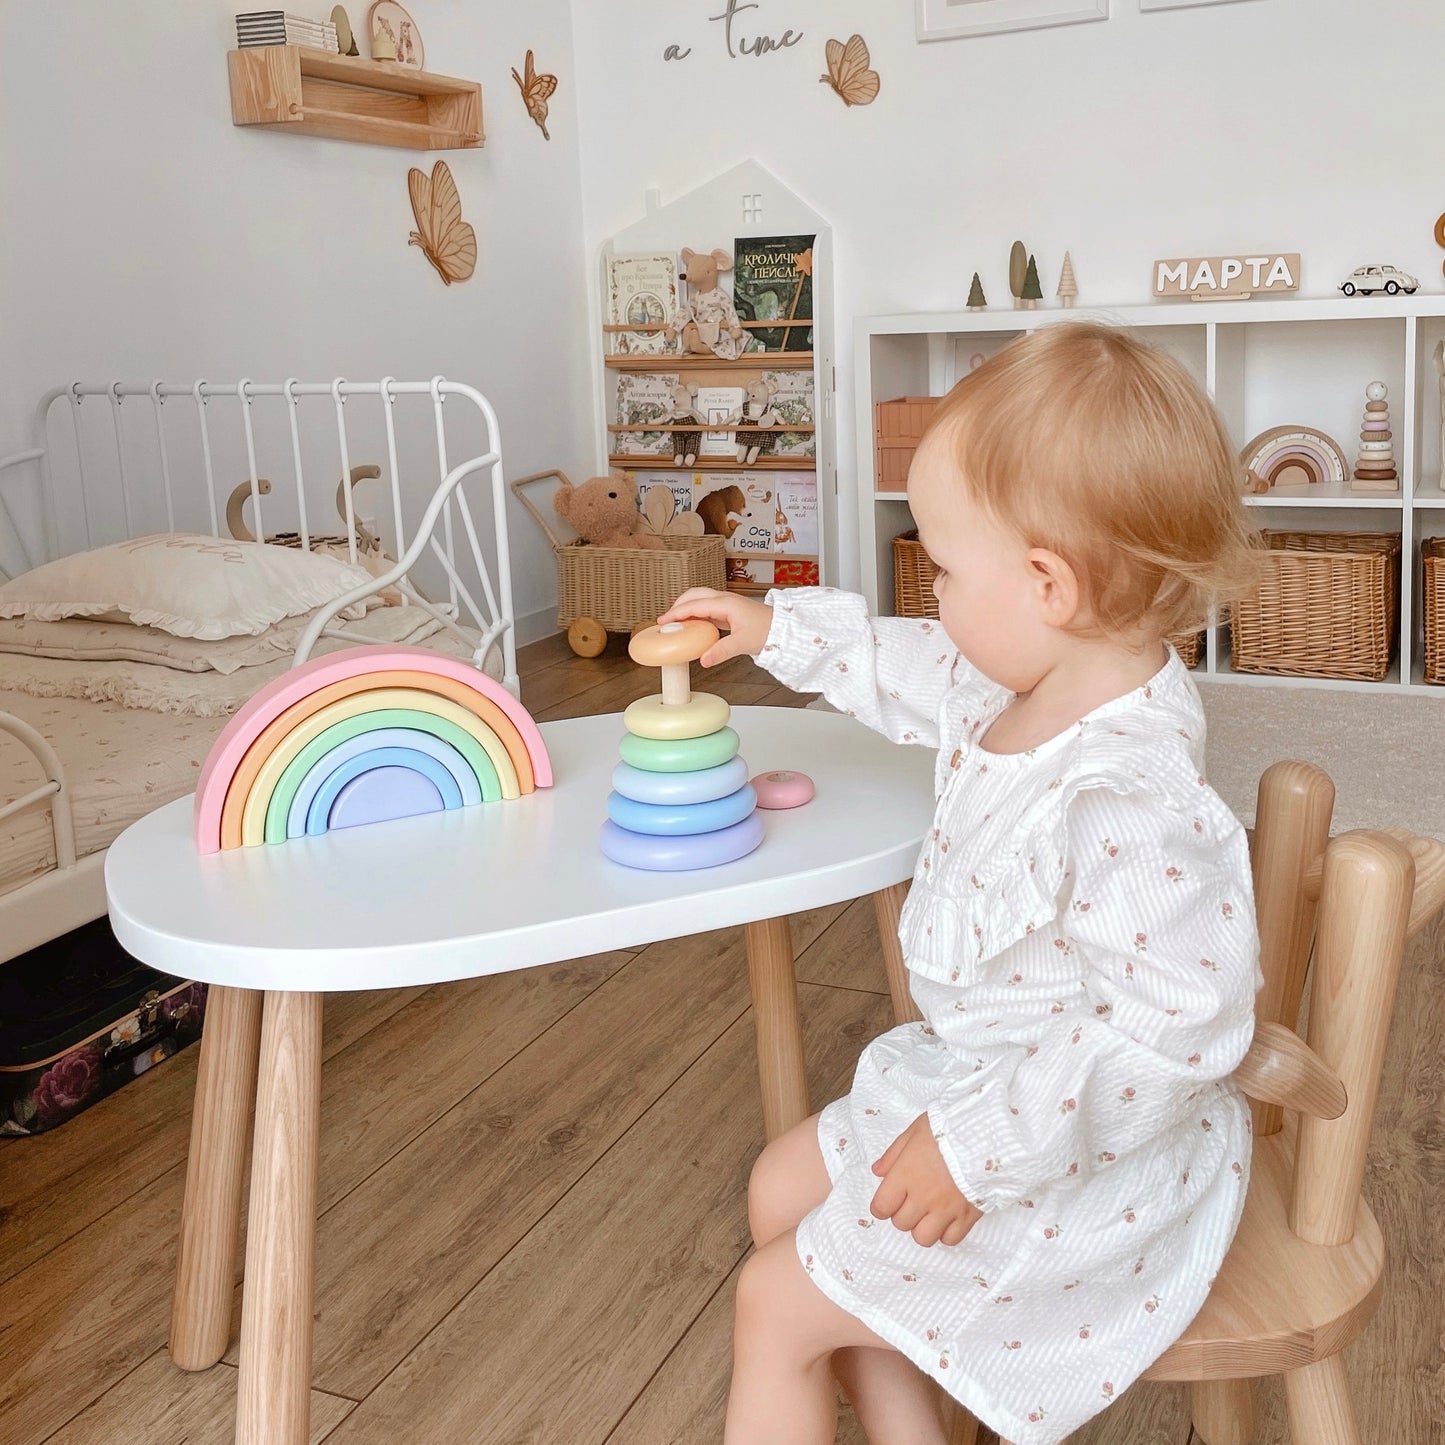 Personalised Montessori Wooden Pyramid and Rainbow for Toddlers